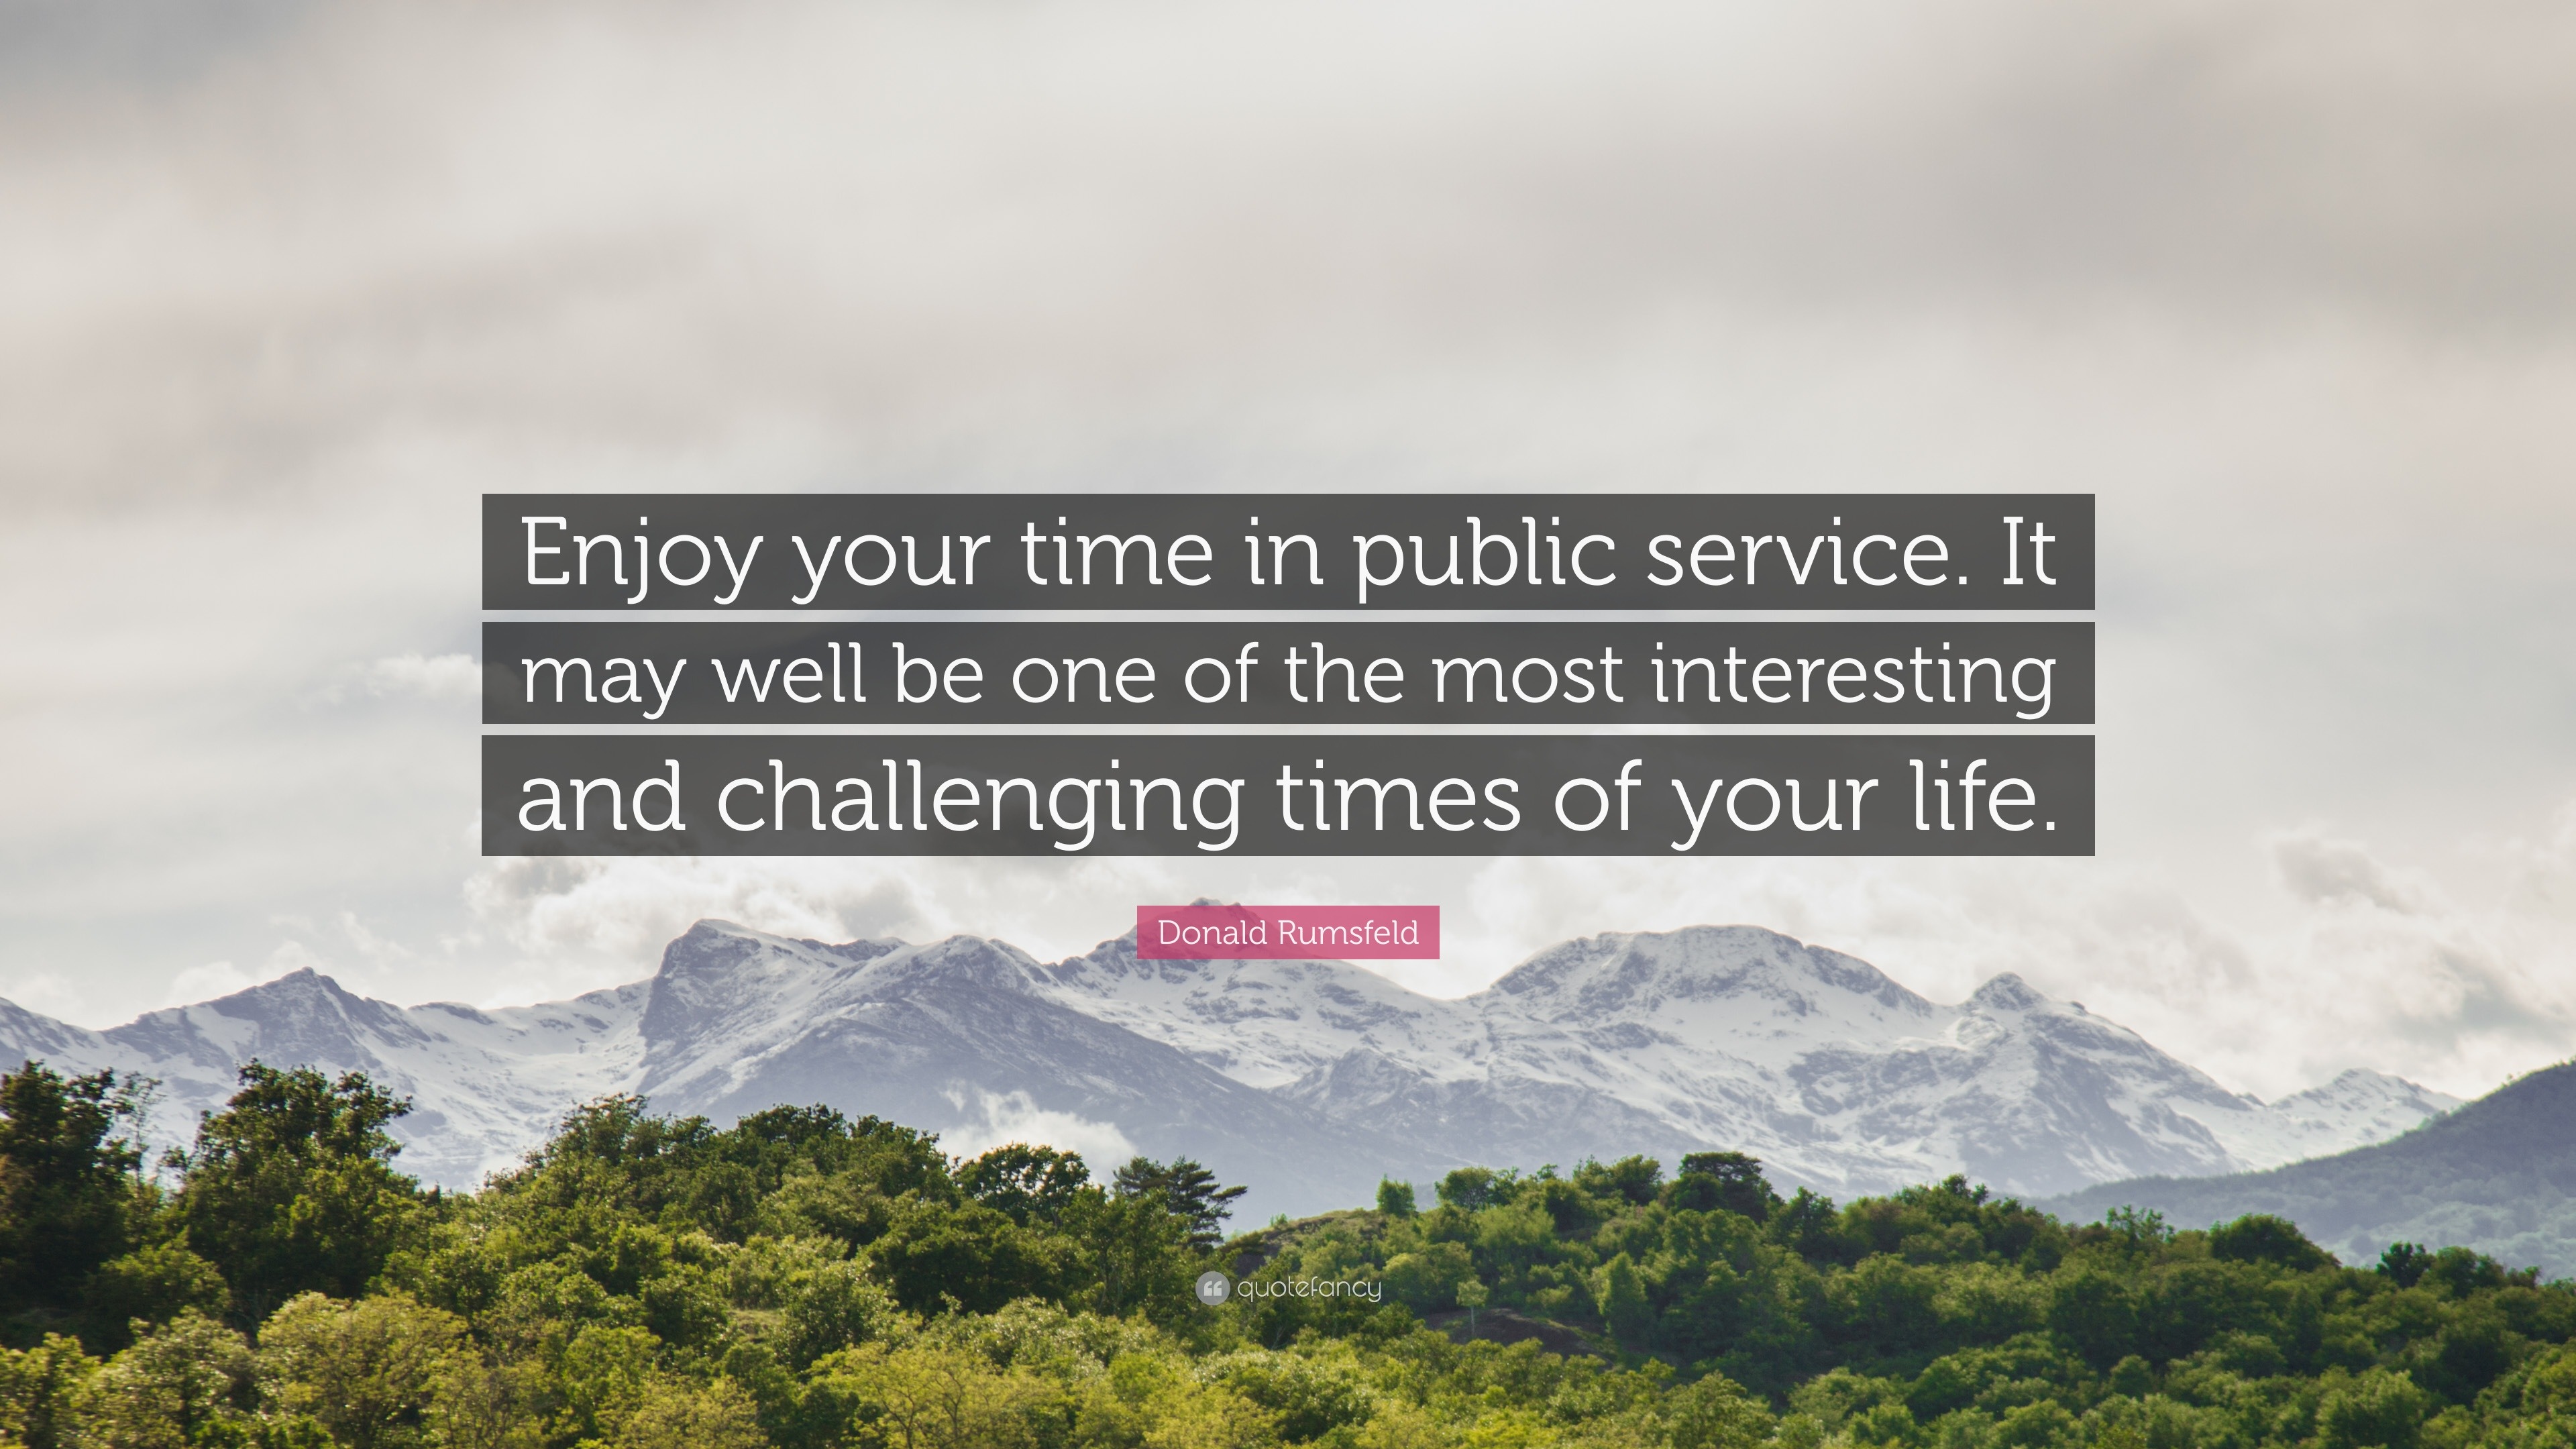 Donald Rumsfeld Quote Enjoy Your Time In Public Service It May Well Be One Of The Most Interesting And Challenging Times Of Your Life 7 Wallpapers Quotefancy